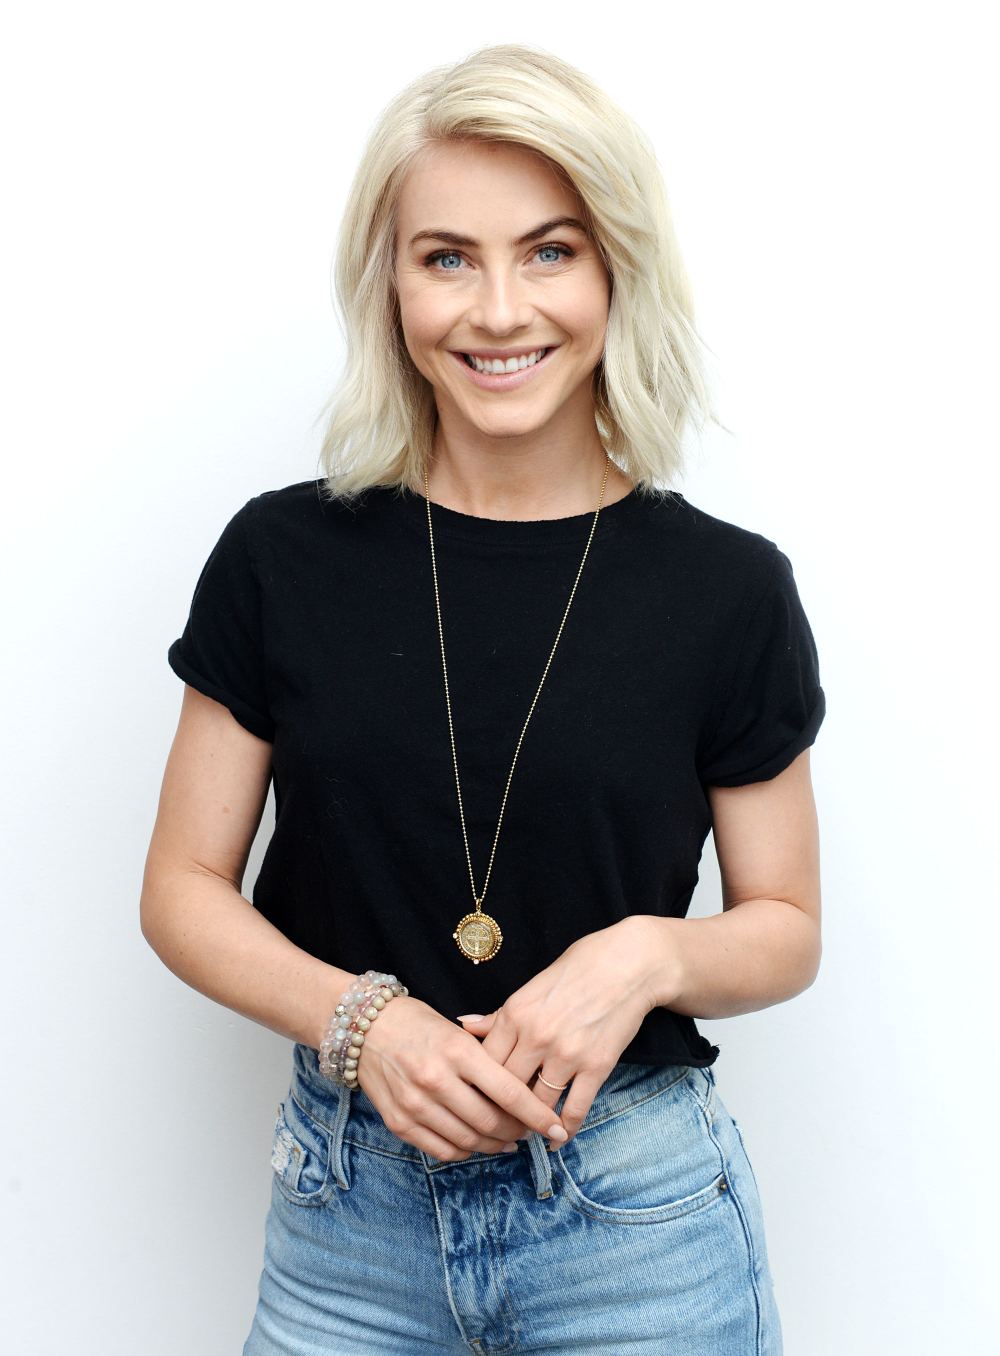 Julianne Hough Almost Shaved Head